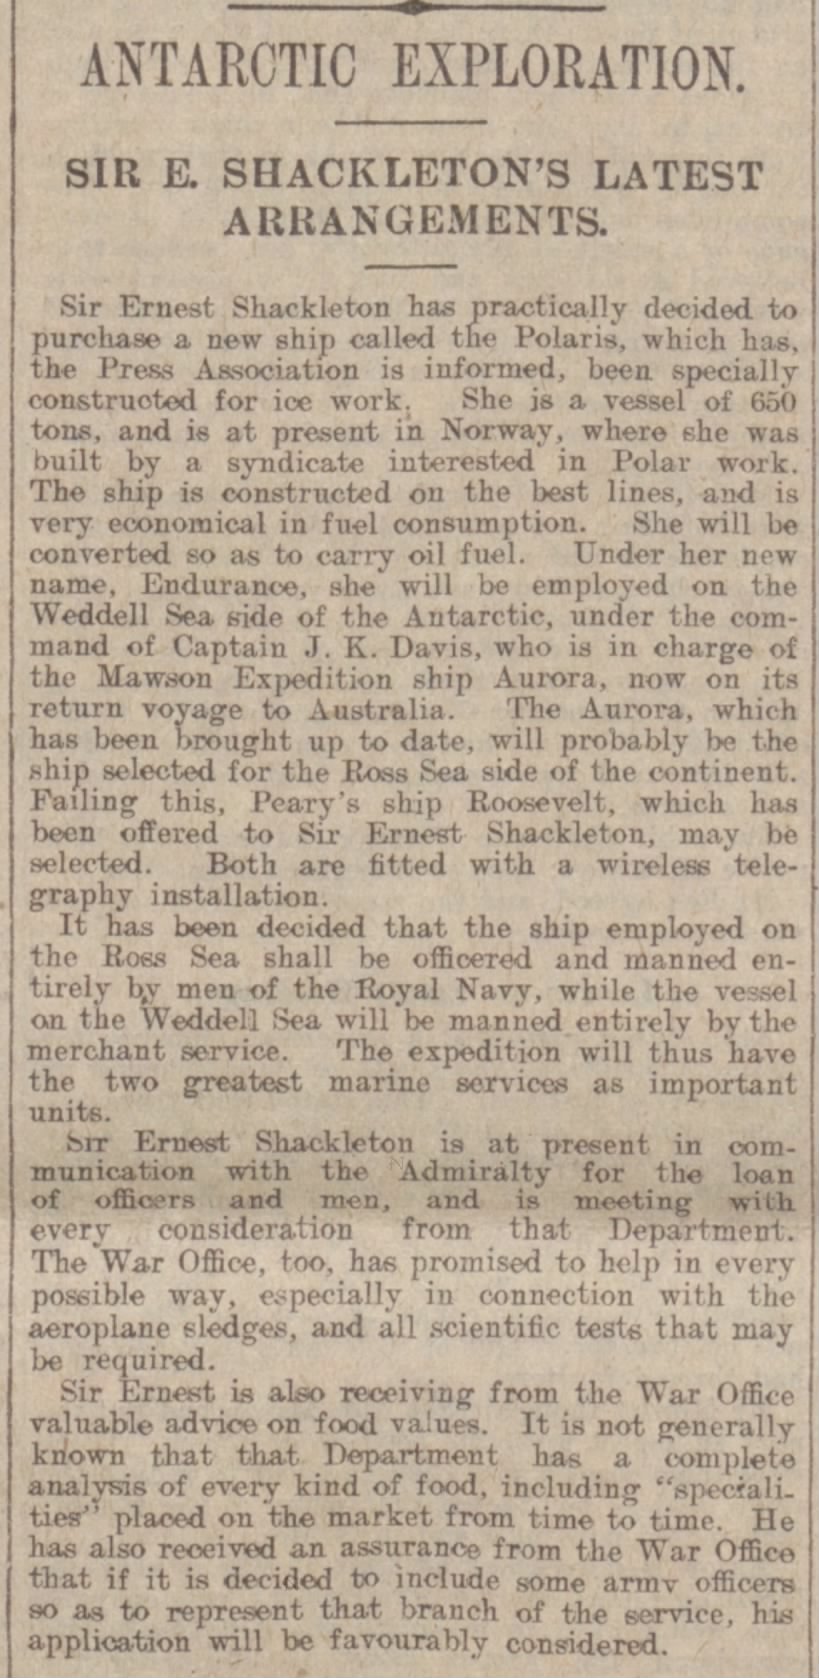 Ernest Shackleton will purchase the Norwegian ship Polaris (renamed Endurance) for his expedition